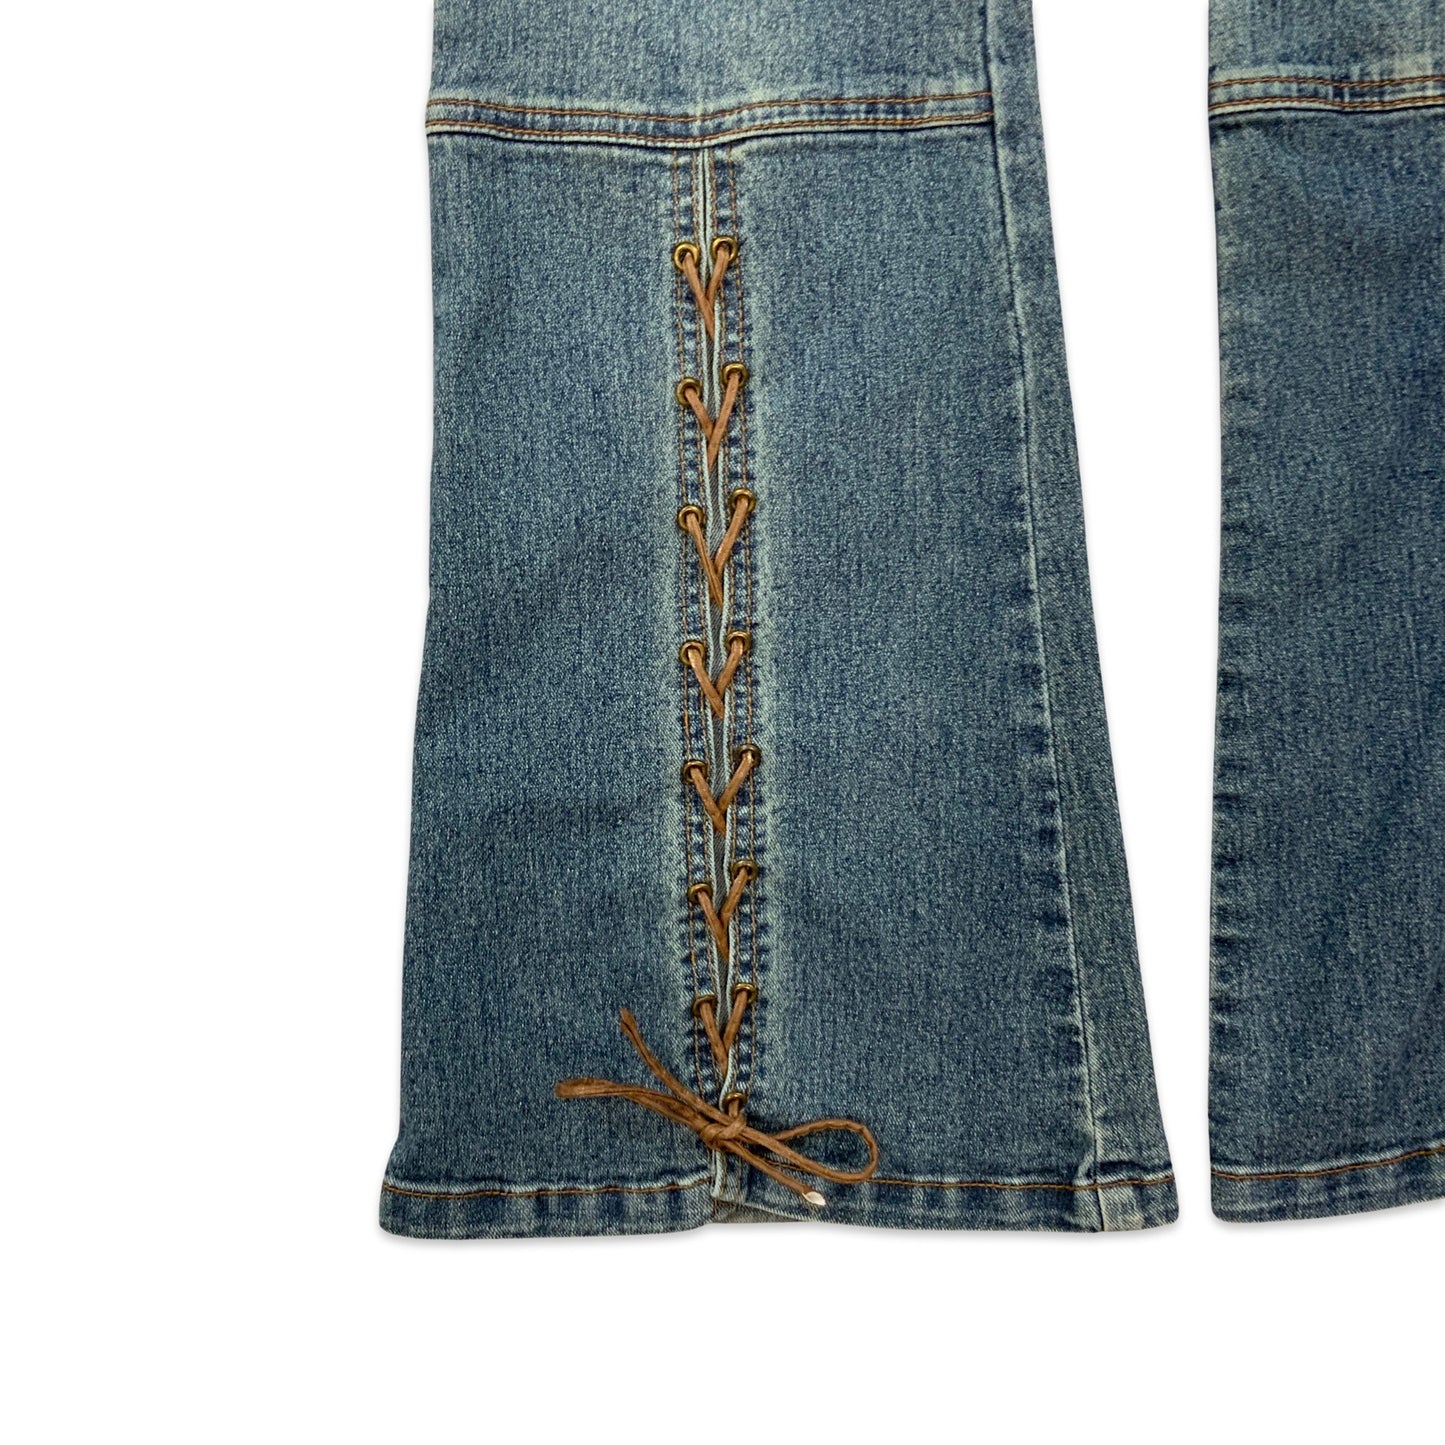 Y2K Mid Wash Flared Jeans with Lace Up Detail